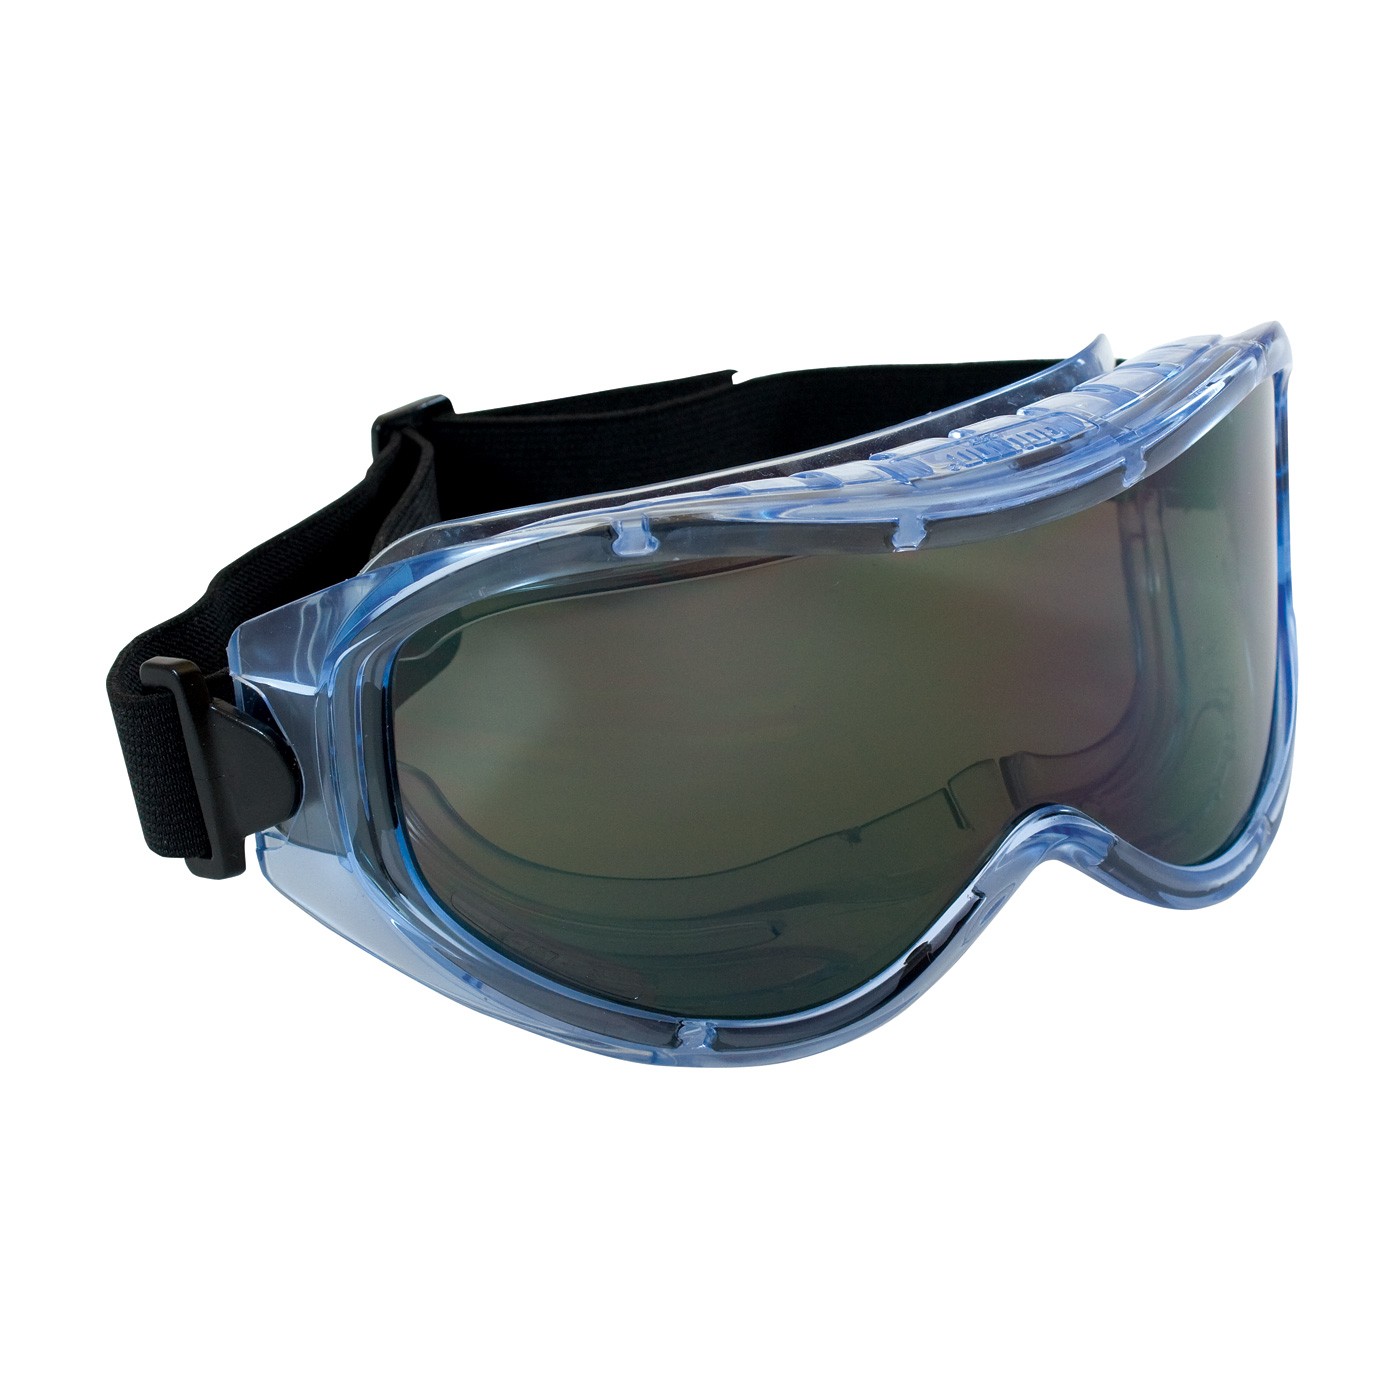 Contempo™ Indirect Vent Goggle with Light Blue Body, Grey Lens and Anti-Scratch / Anti-Fog Coating  (#251-5300-402)